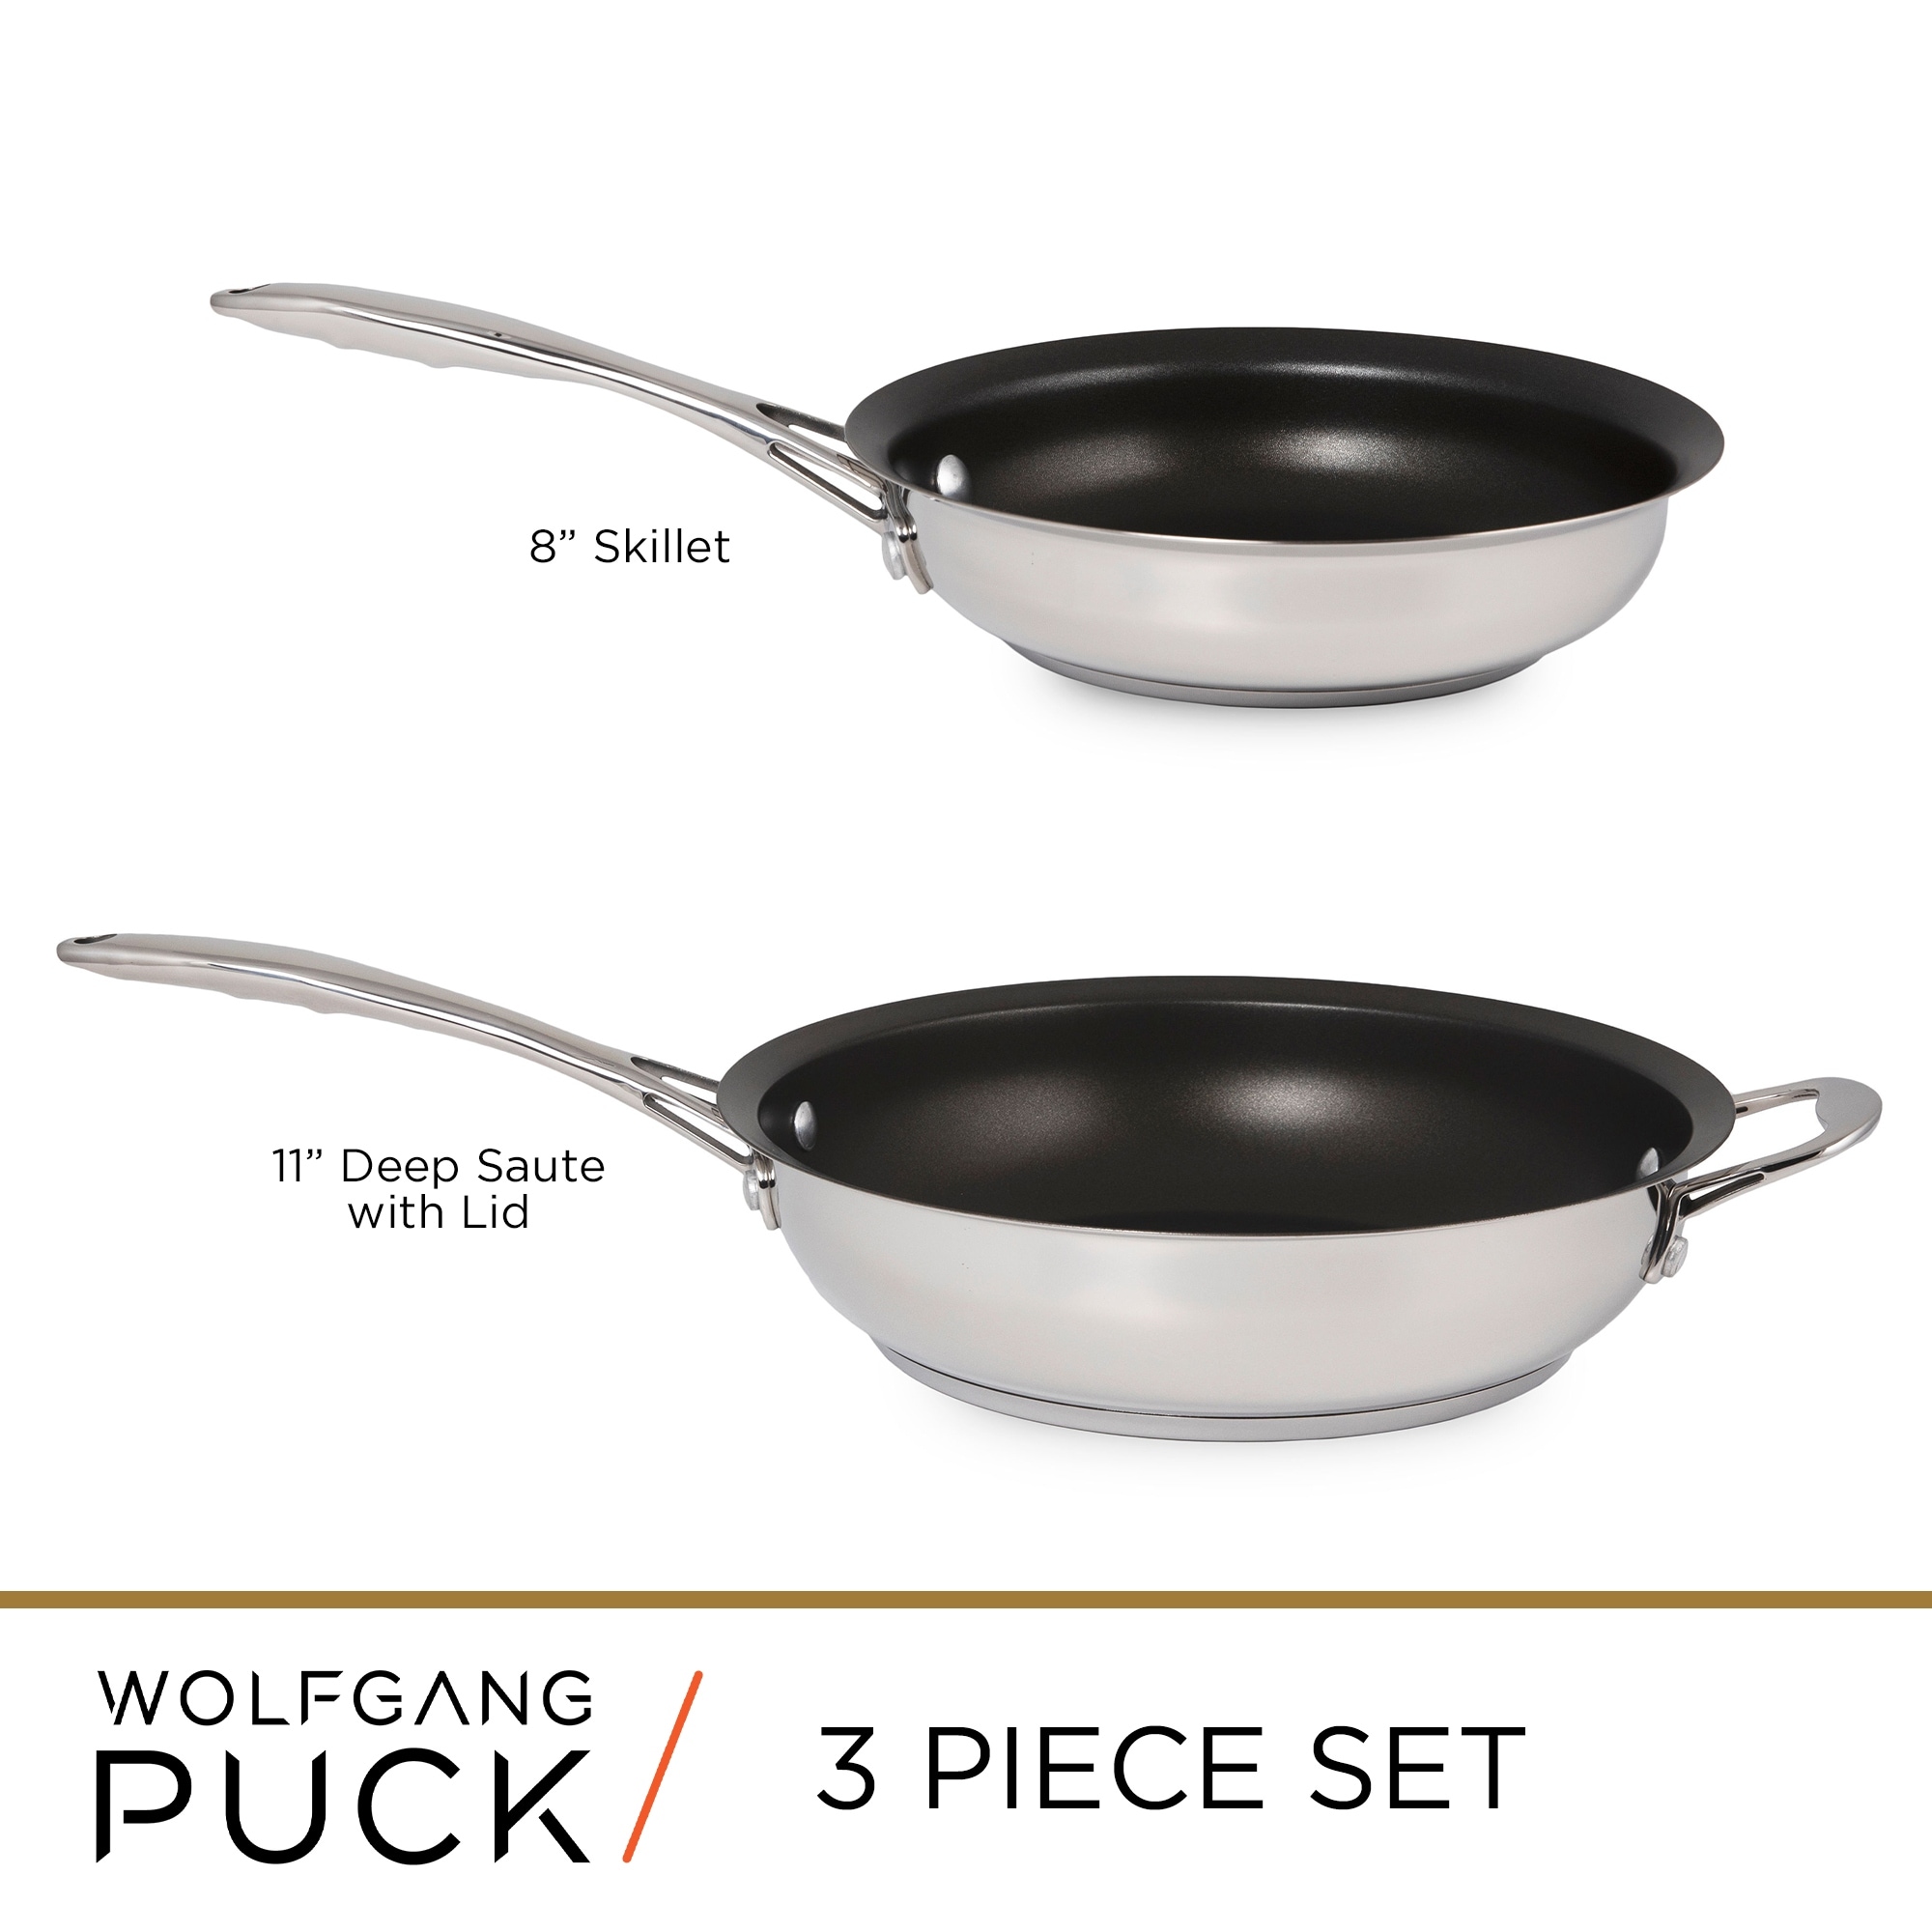 Wolfgang Puck 3-Piece Stainless Steel Skillet Set, Scratch-Resistant  Non-Stick Coating, Includes a Large and Small Skillet